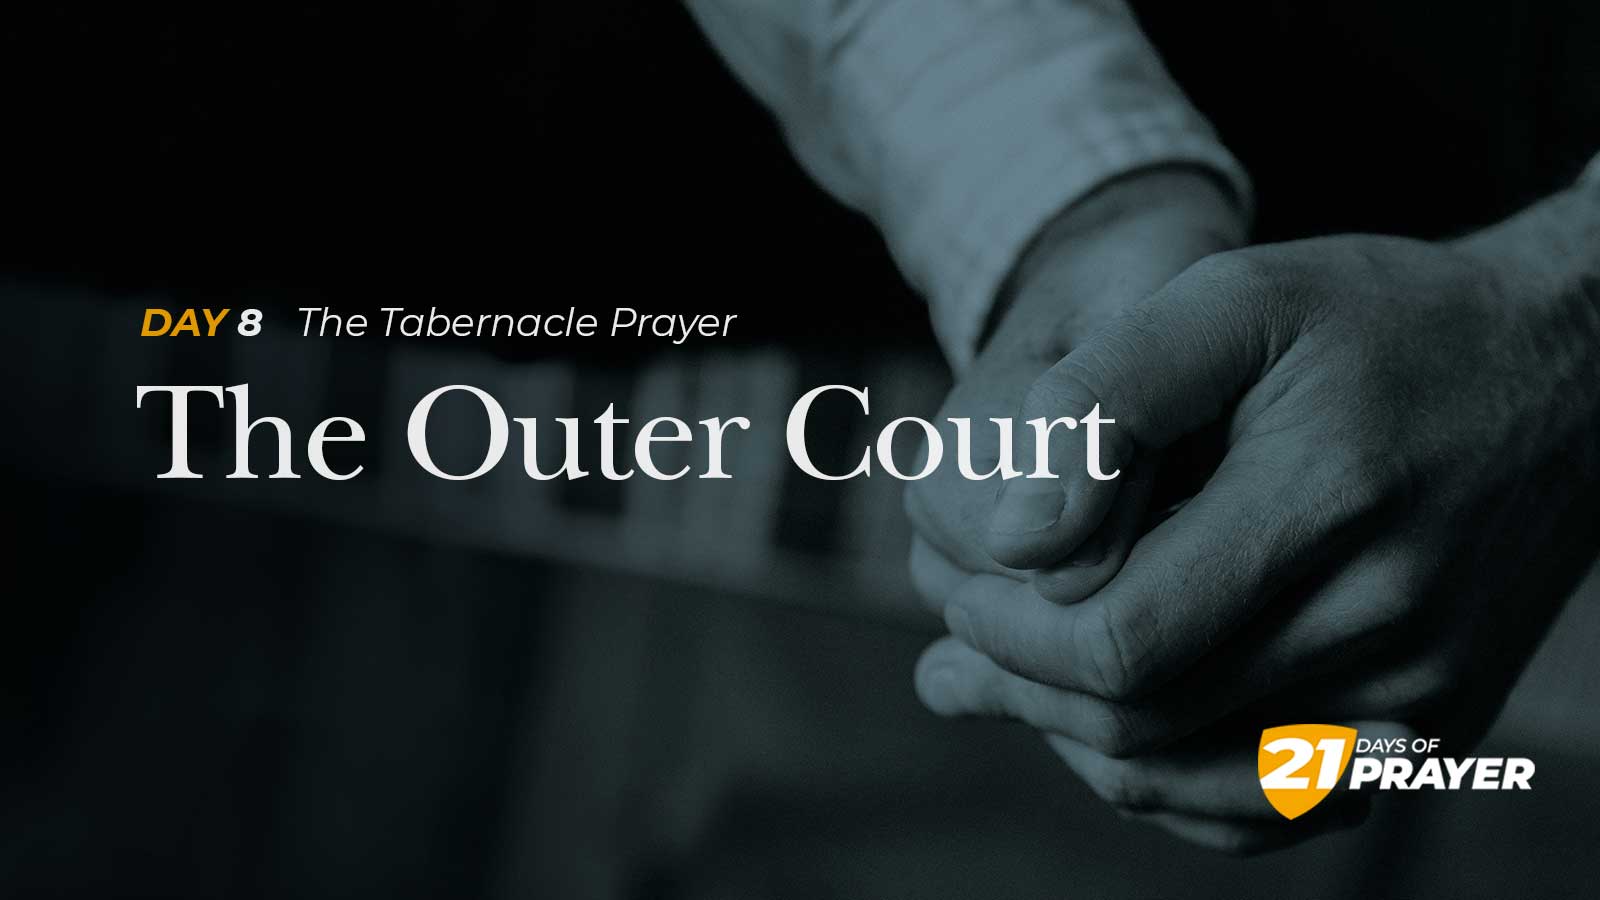 Day 8:TABERNACLE PRAYER- The Outer Court